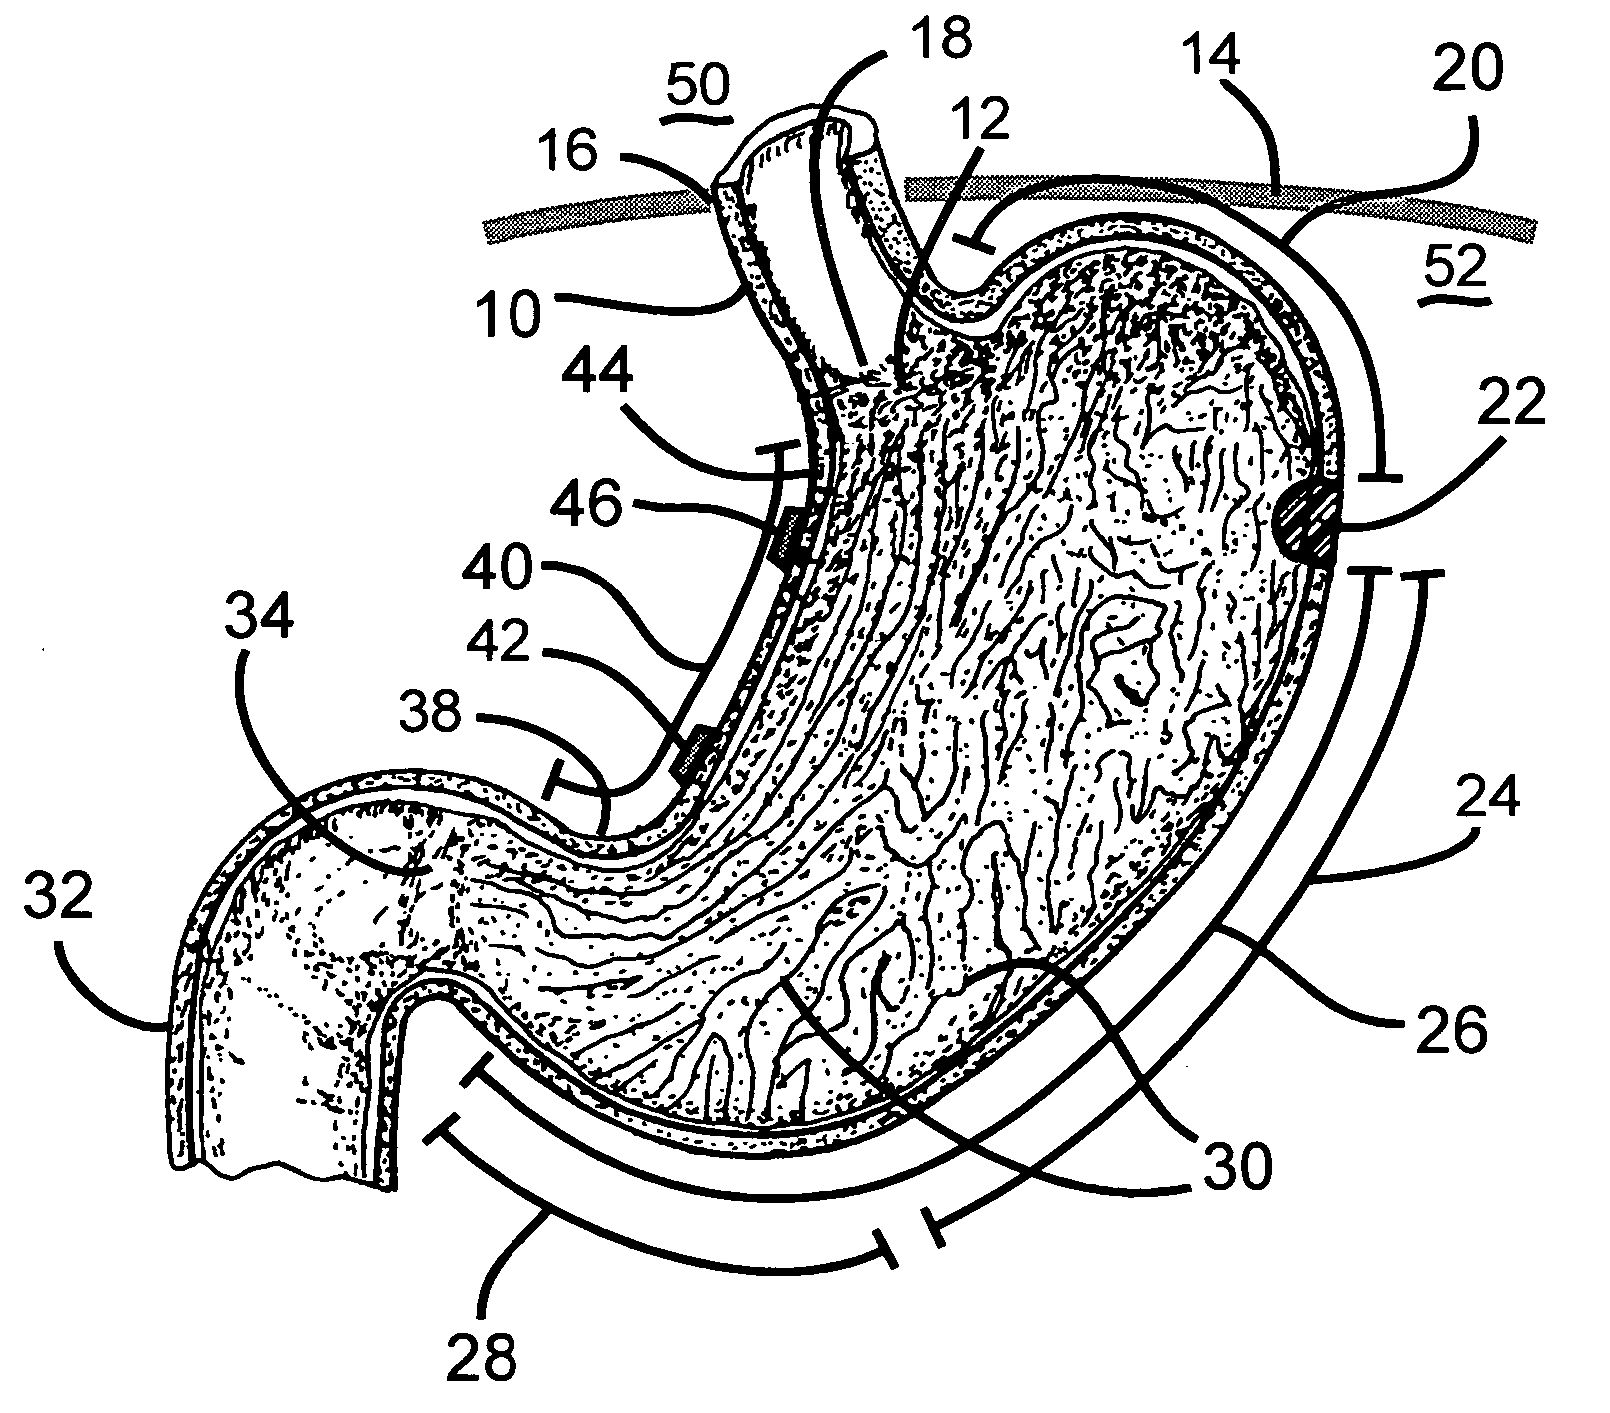 Process and electrostimulation device for treating obesity and/or gastroesophageal reflux disease